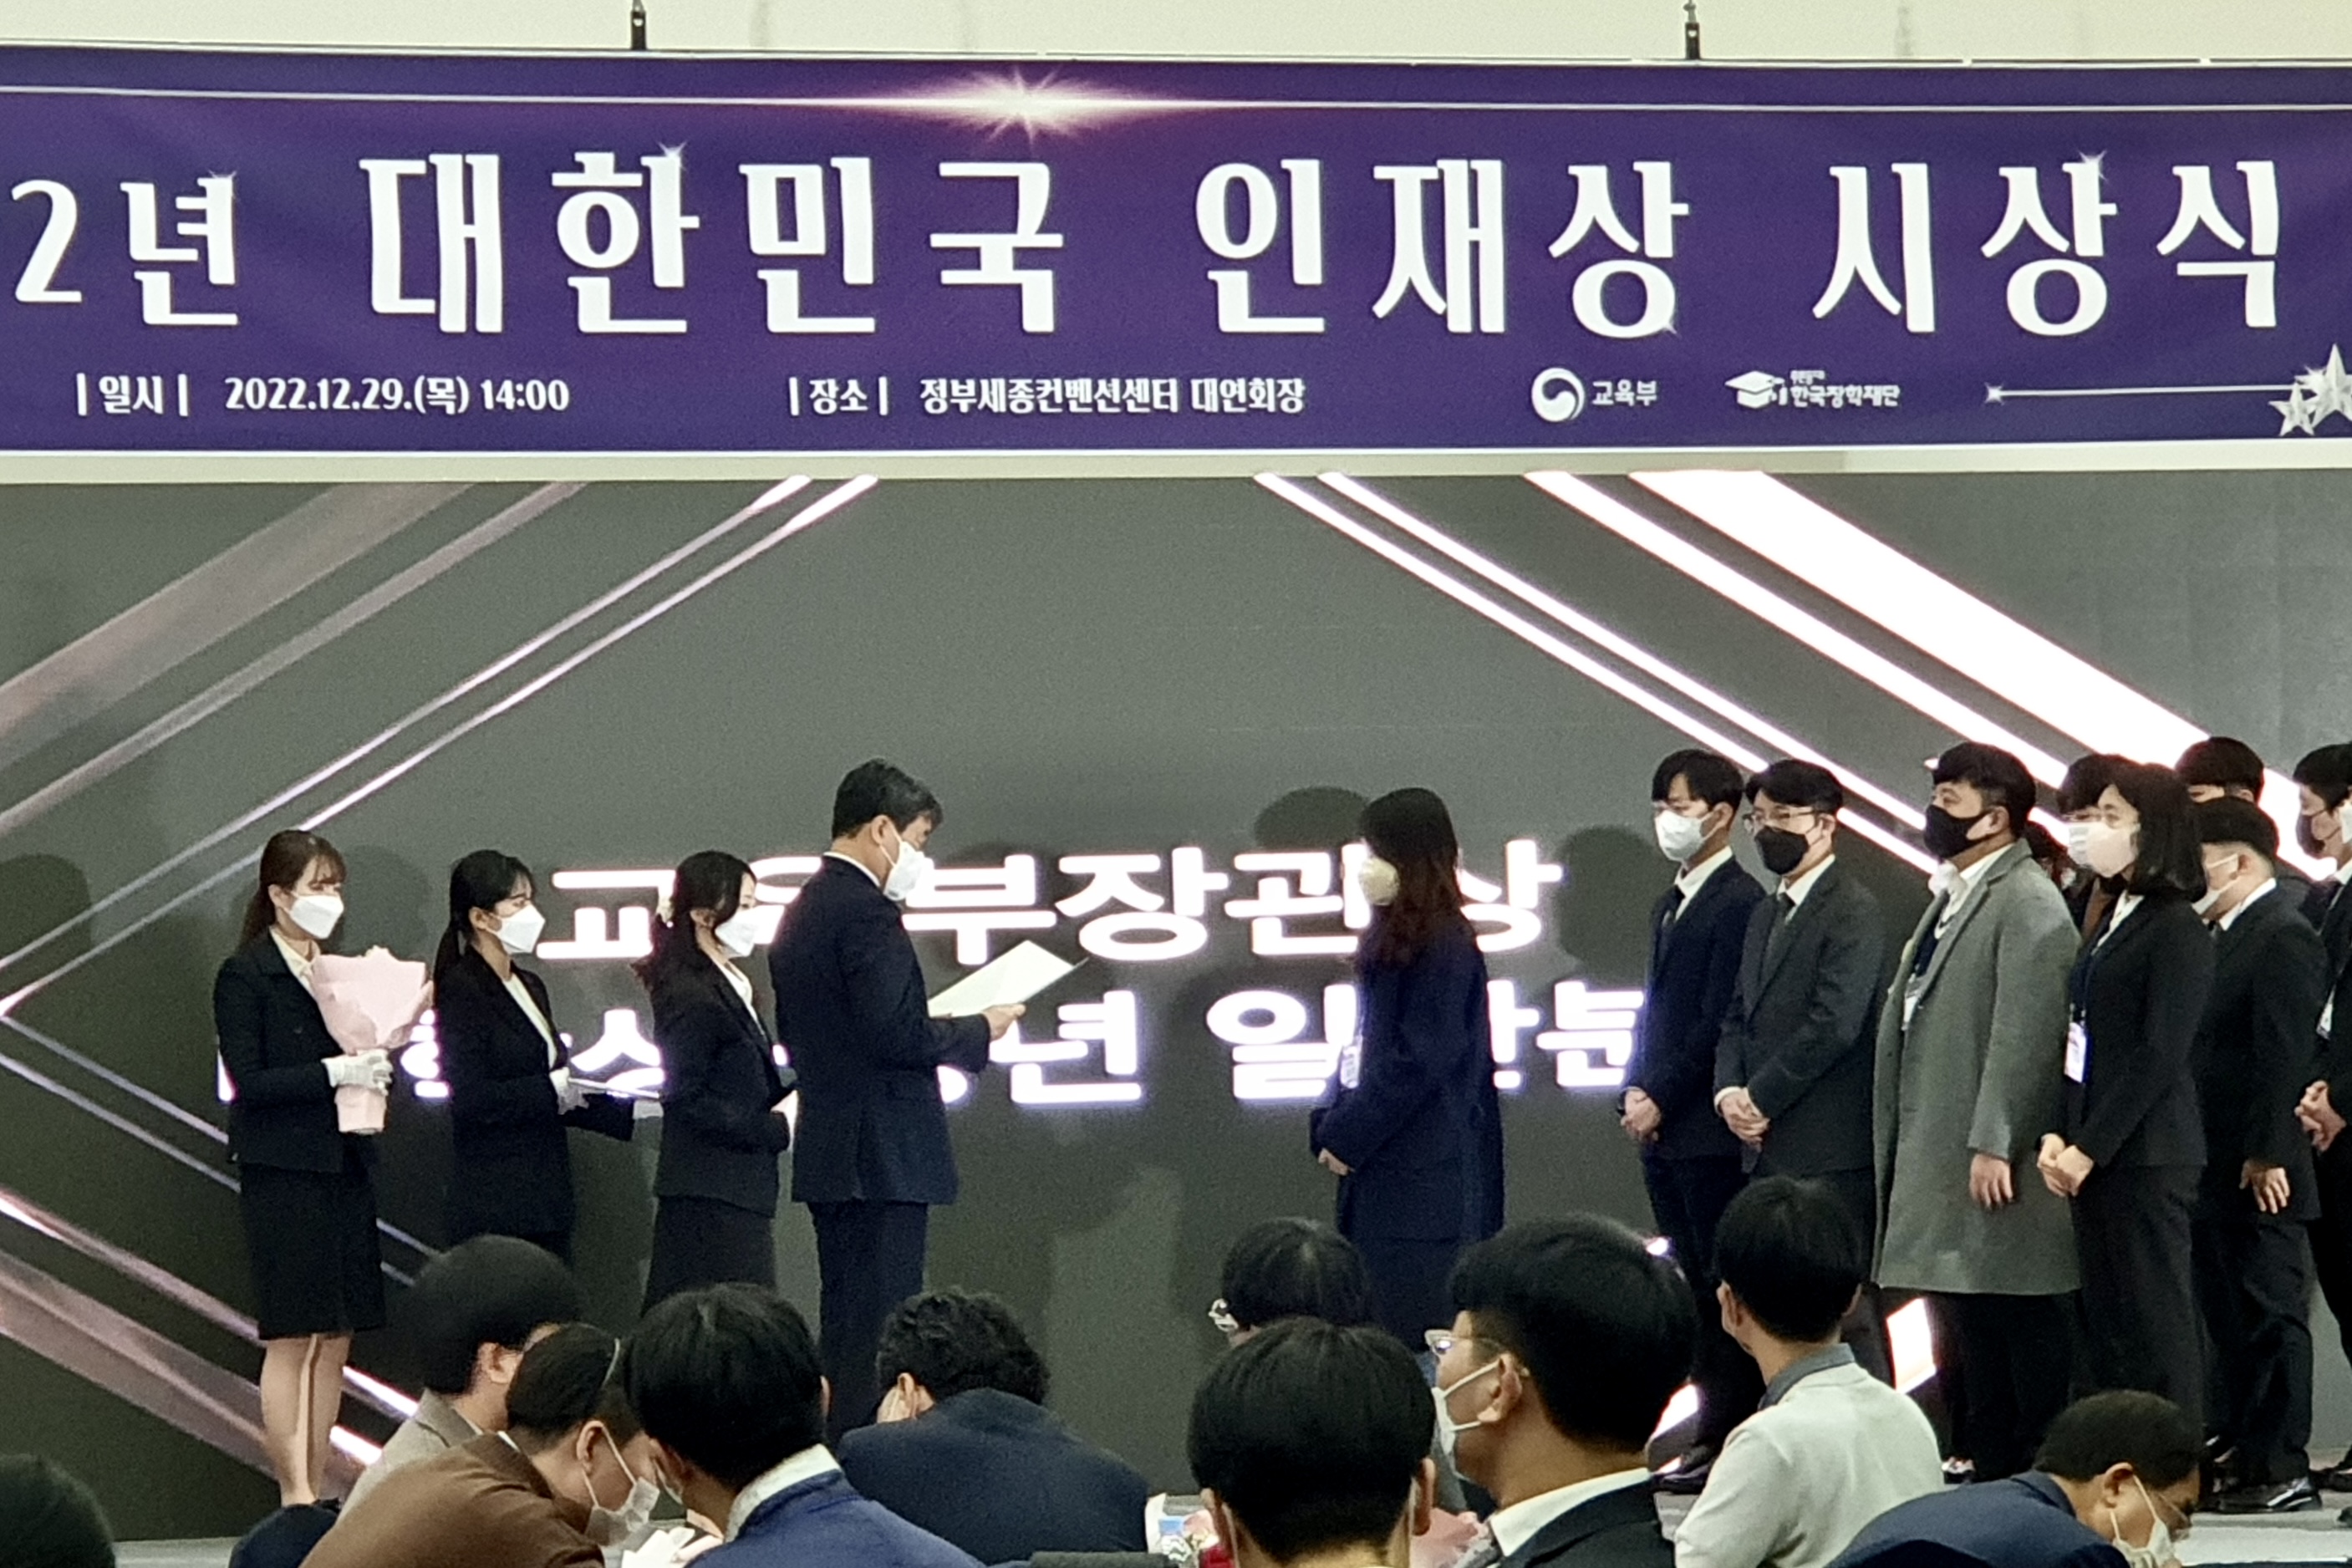 The award presentation ceremony took place at Sejong Convention Center on December 29, 2022.